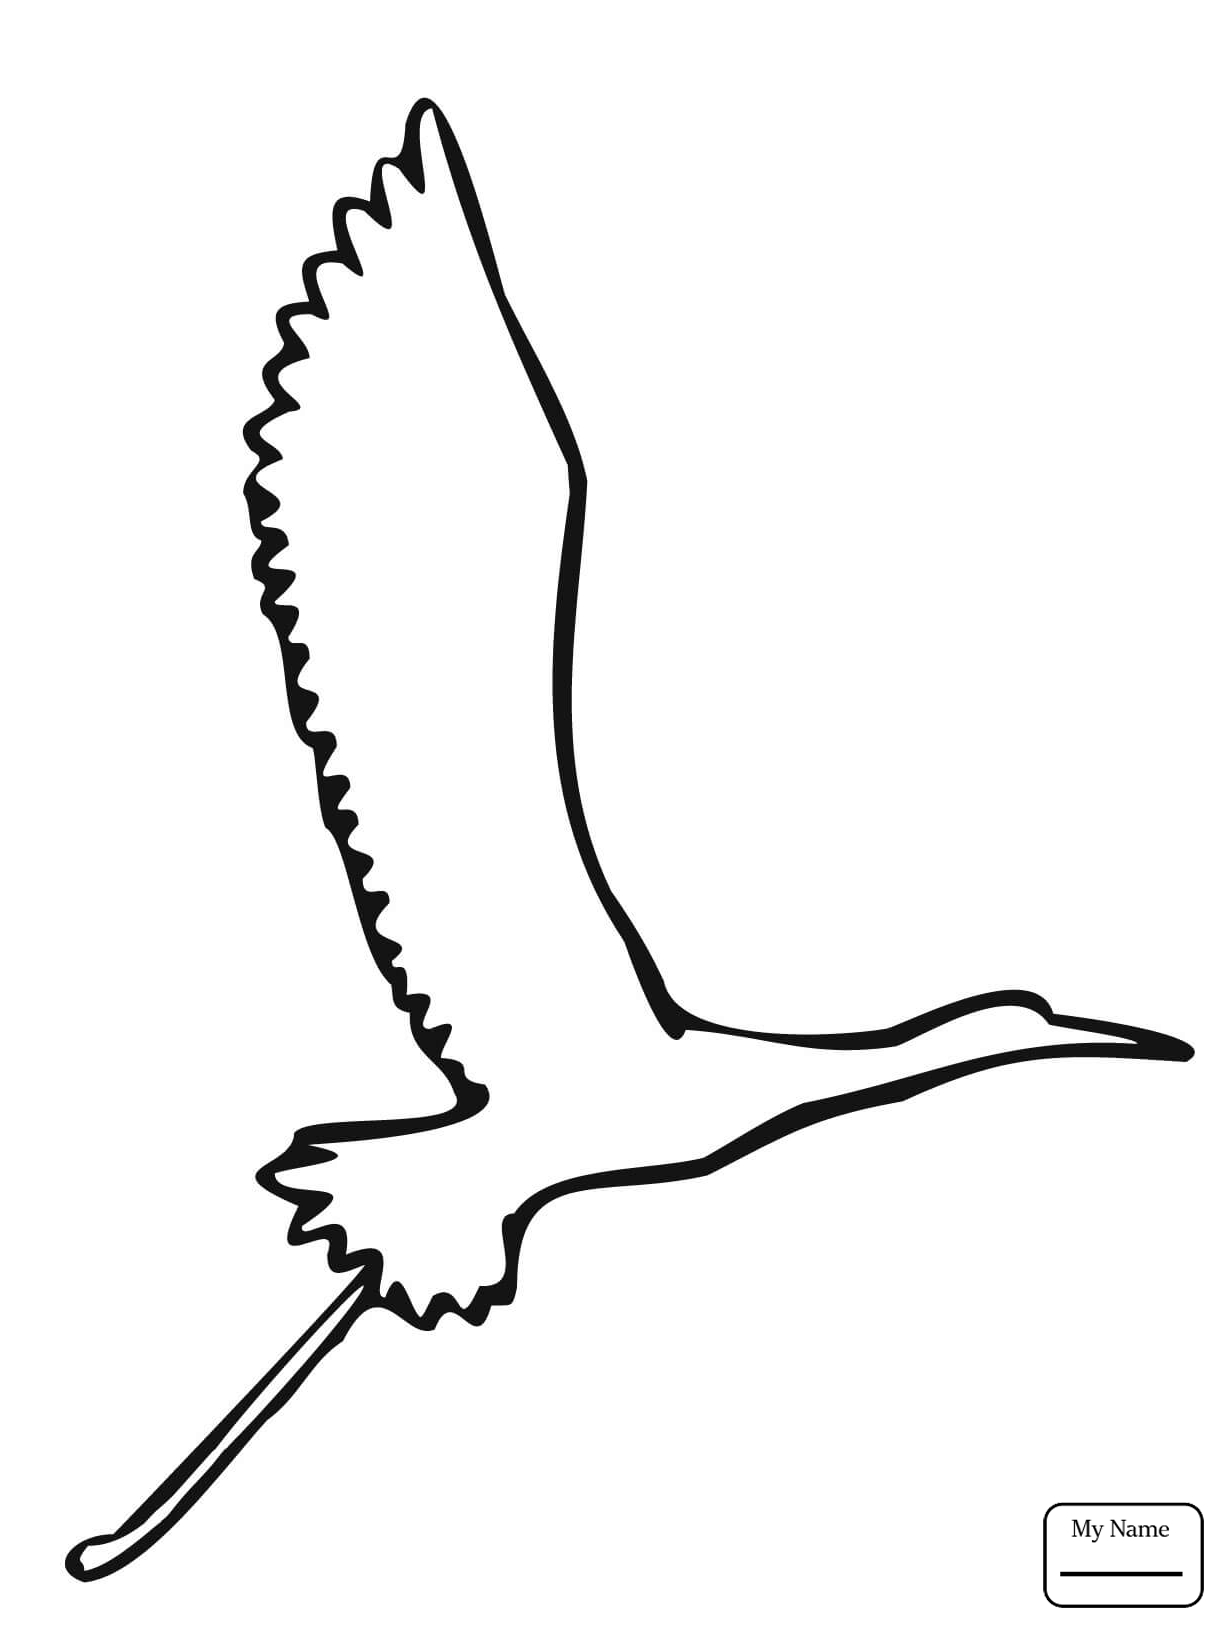 Bird Flight Drawing at GetDrawings.com | Free for personal use Bird